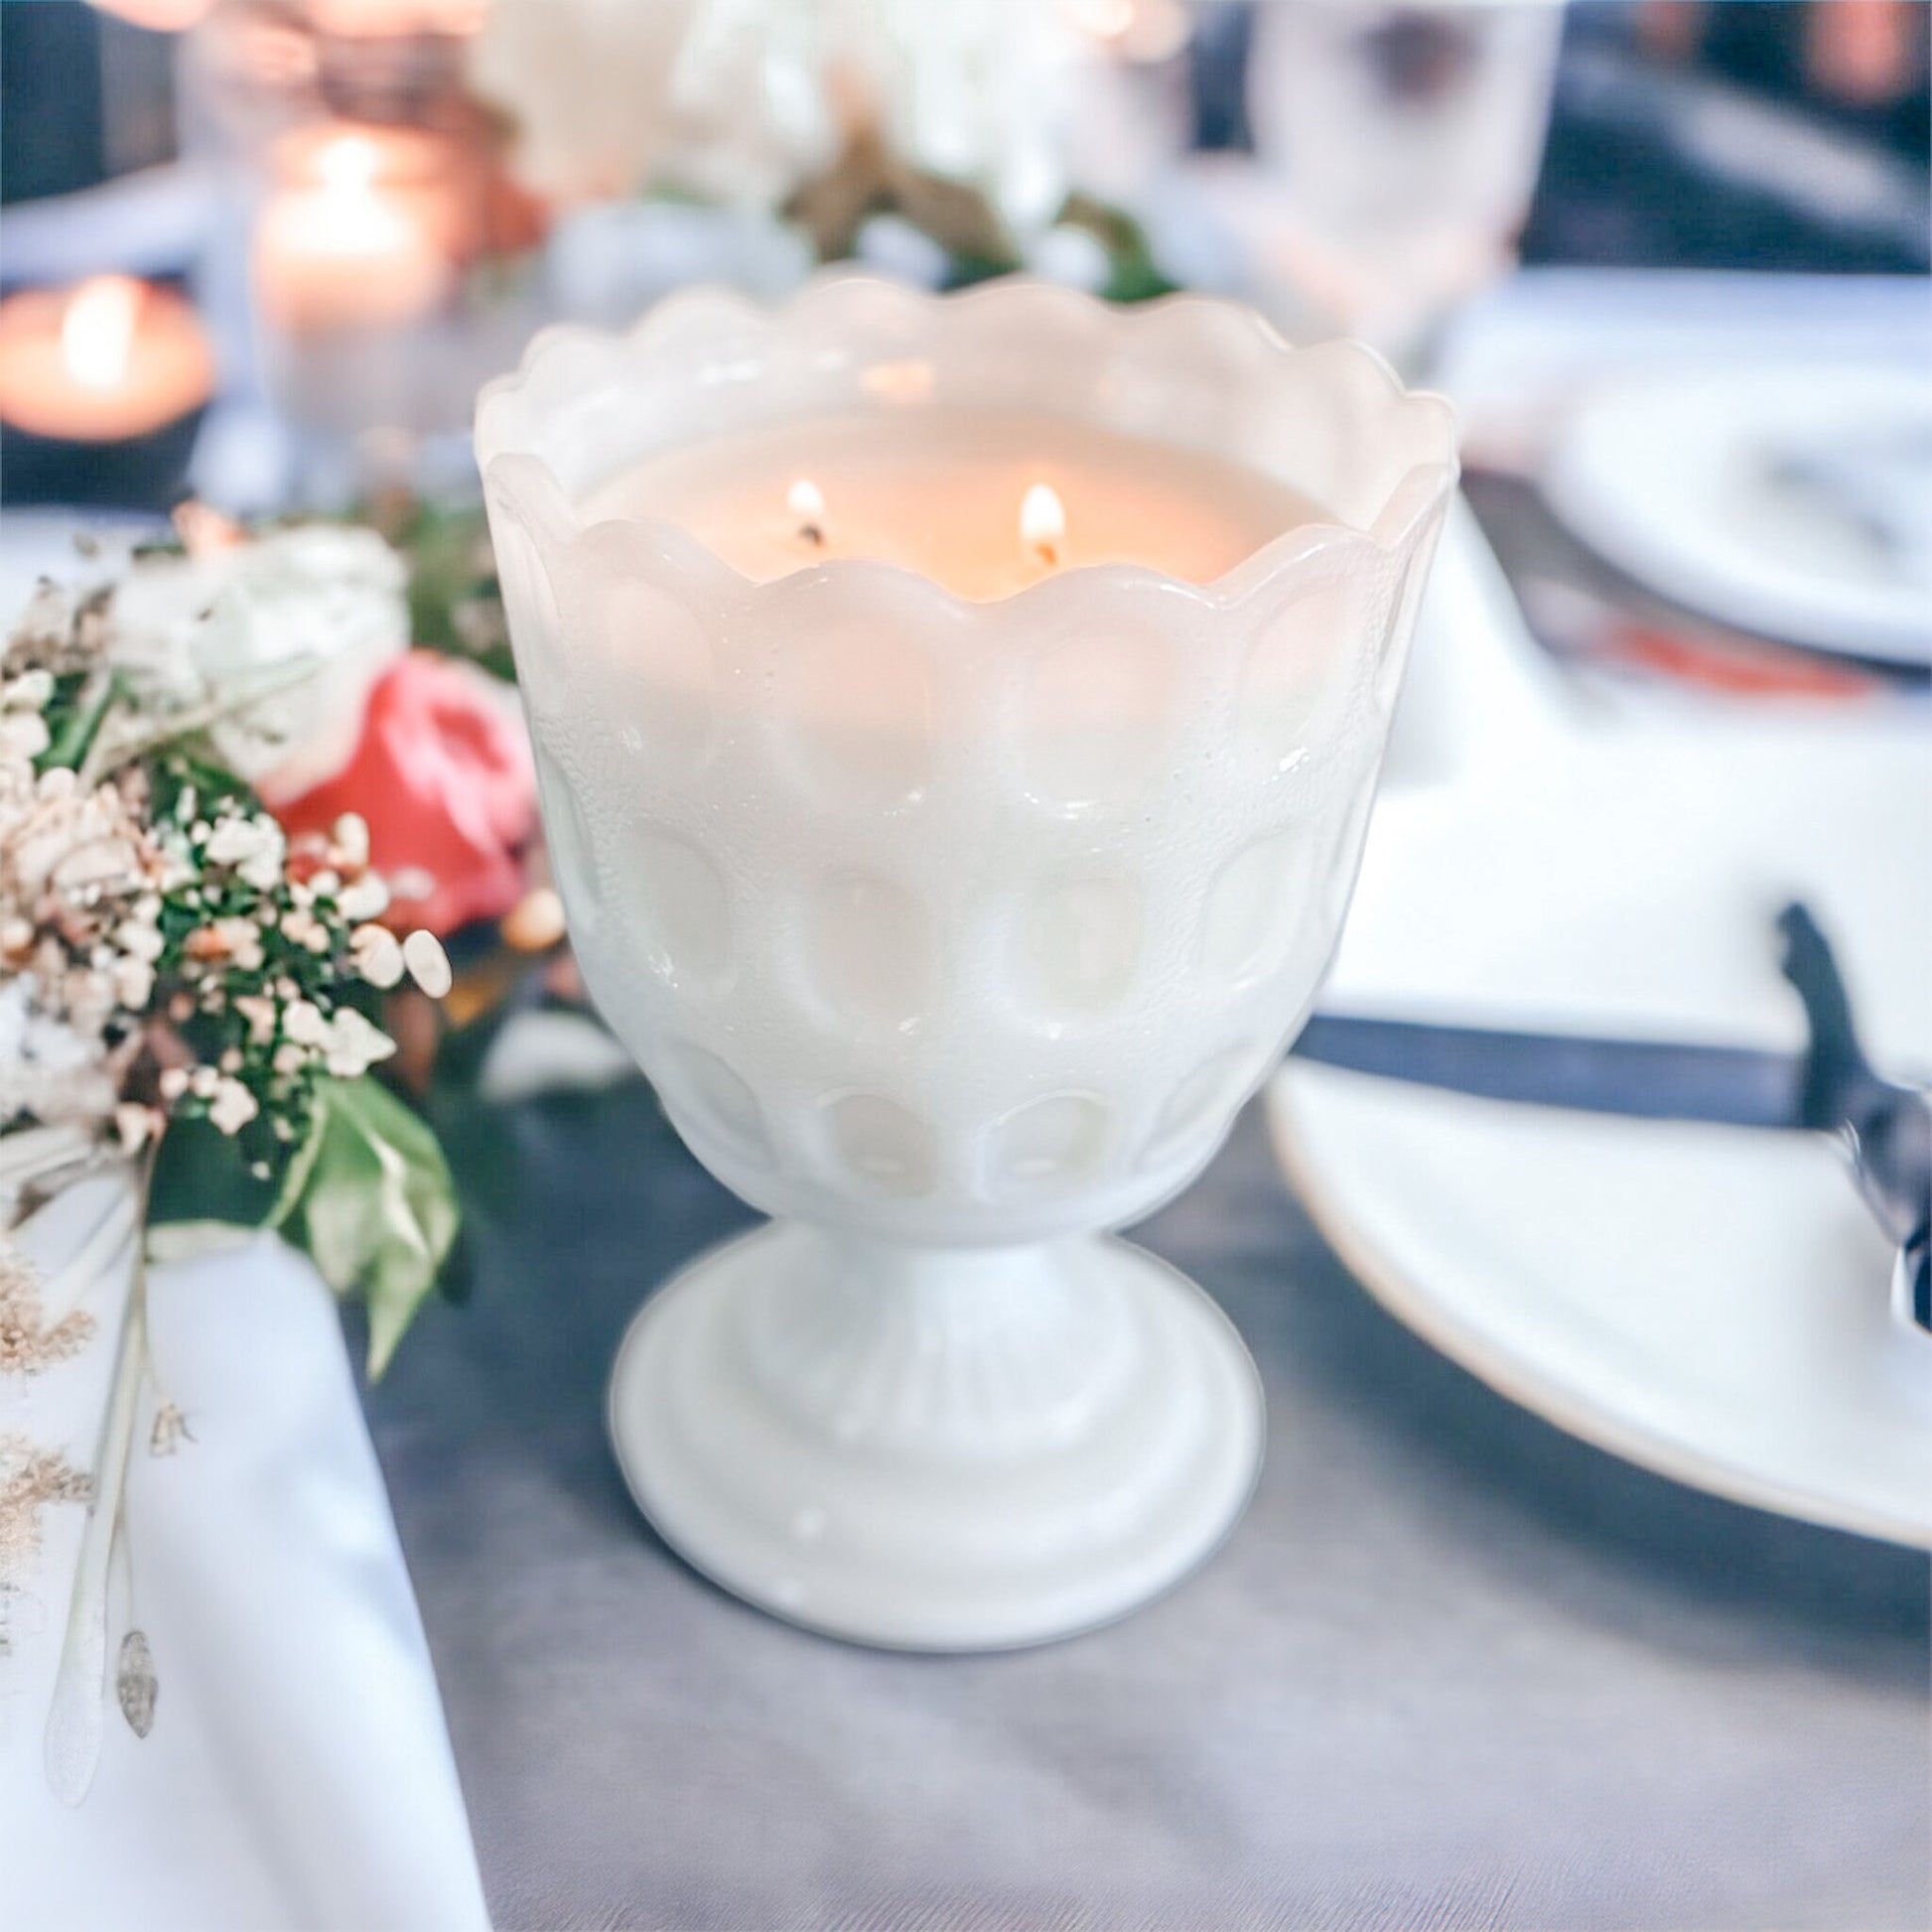 Soy Wax Candle in Vintage Milk Glass Vase